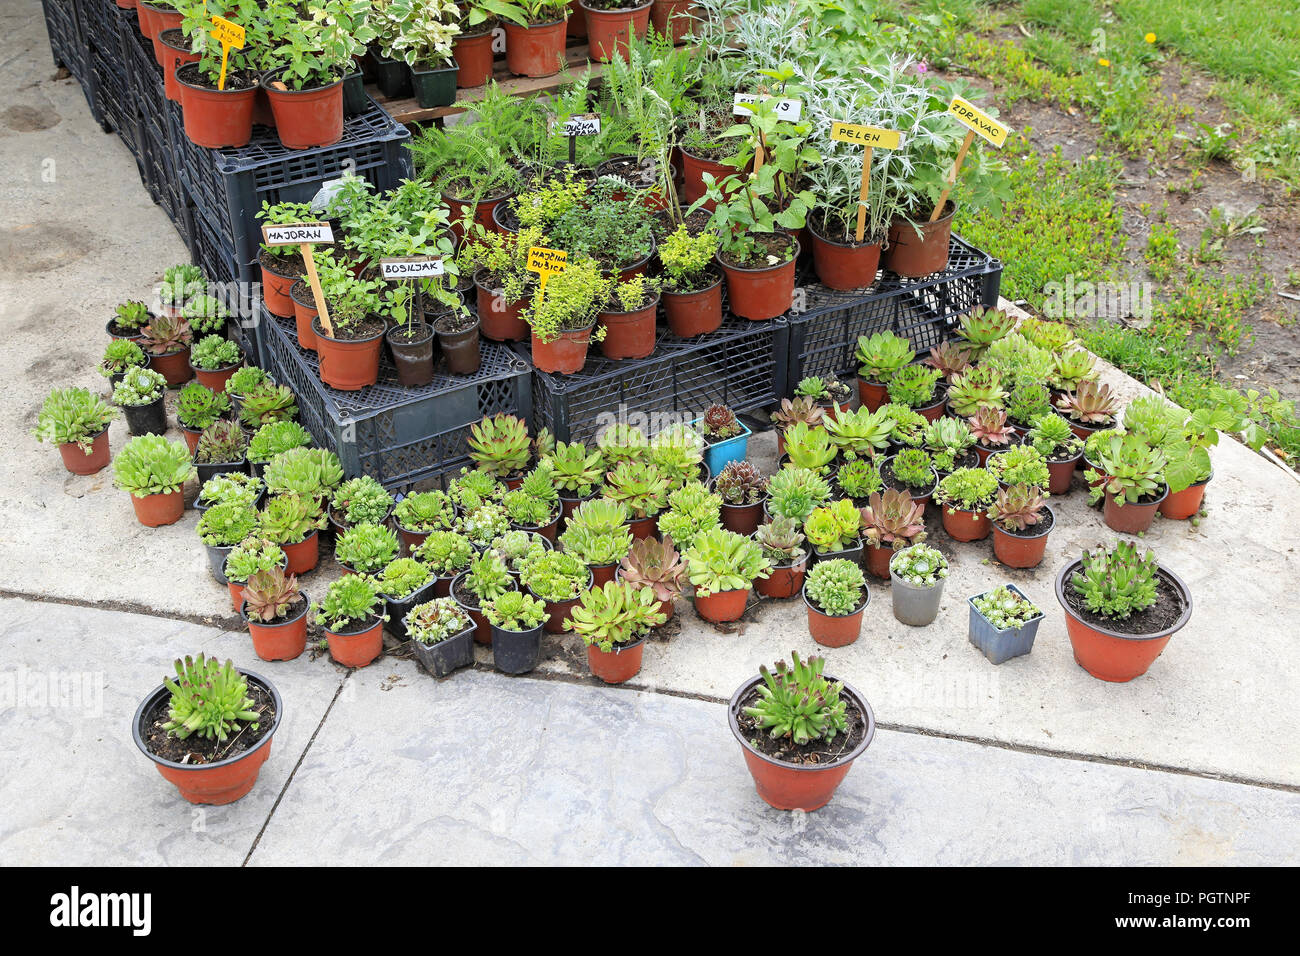 Natural edible plants and herbs in pots Stock Photo